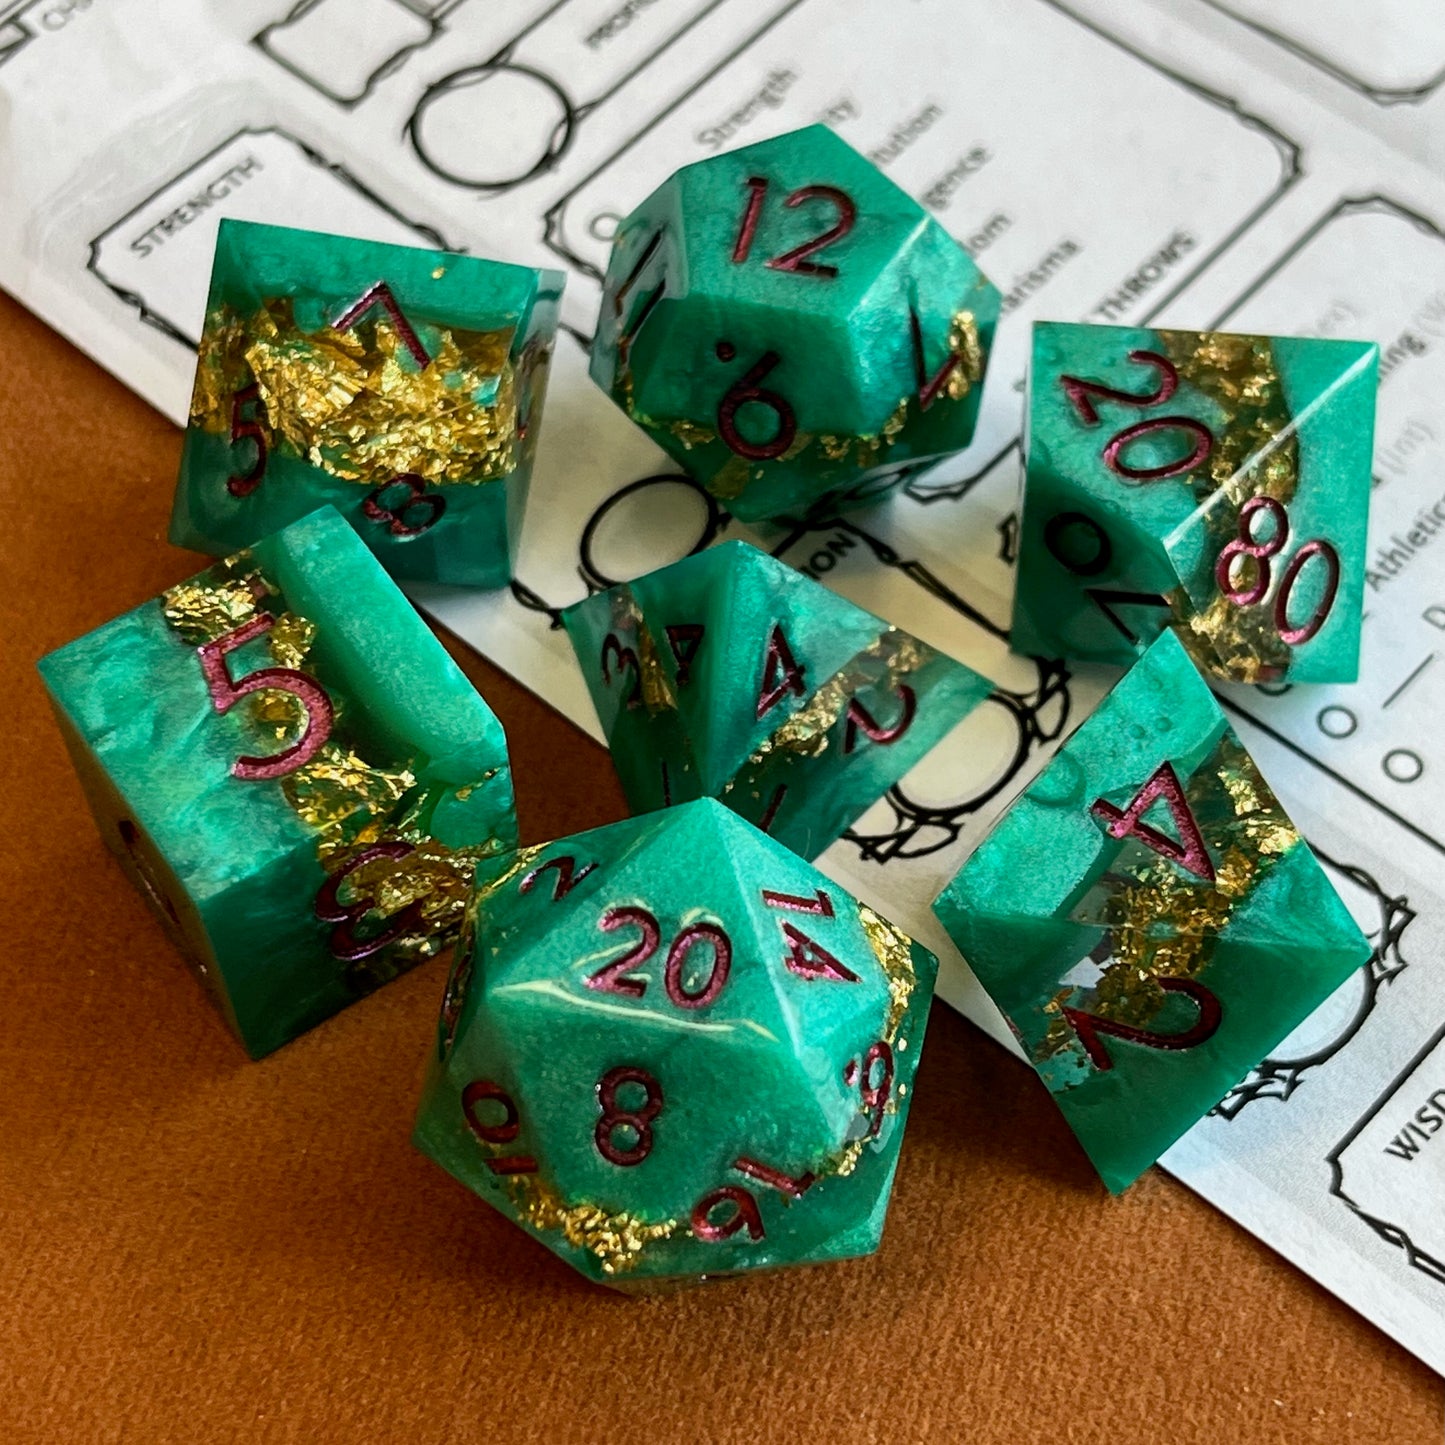 A whole new world, TTRPG, role playing game dnd dice set, polyhedral dice, shiny math rocks